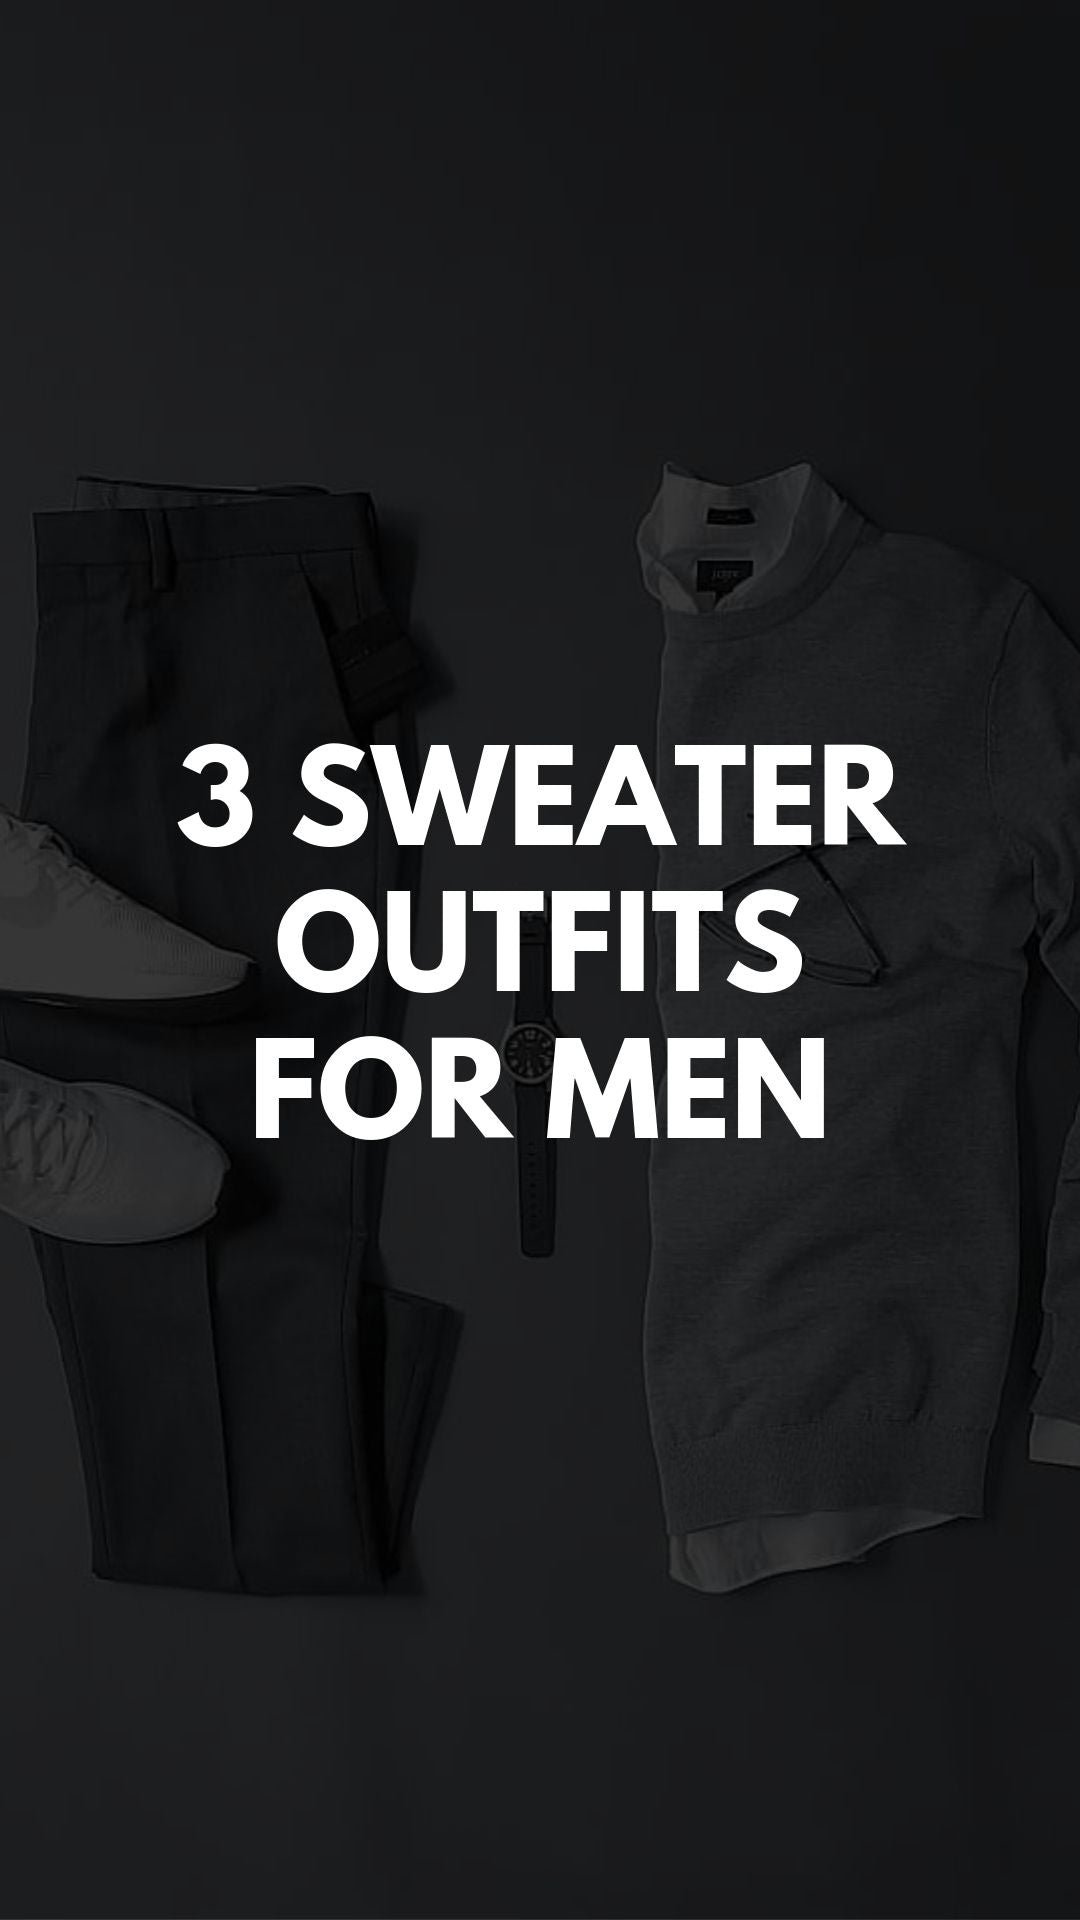 Sweater grids for men. Sweater outfits for men